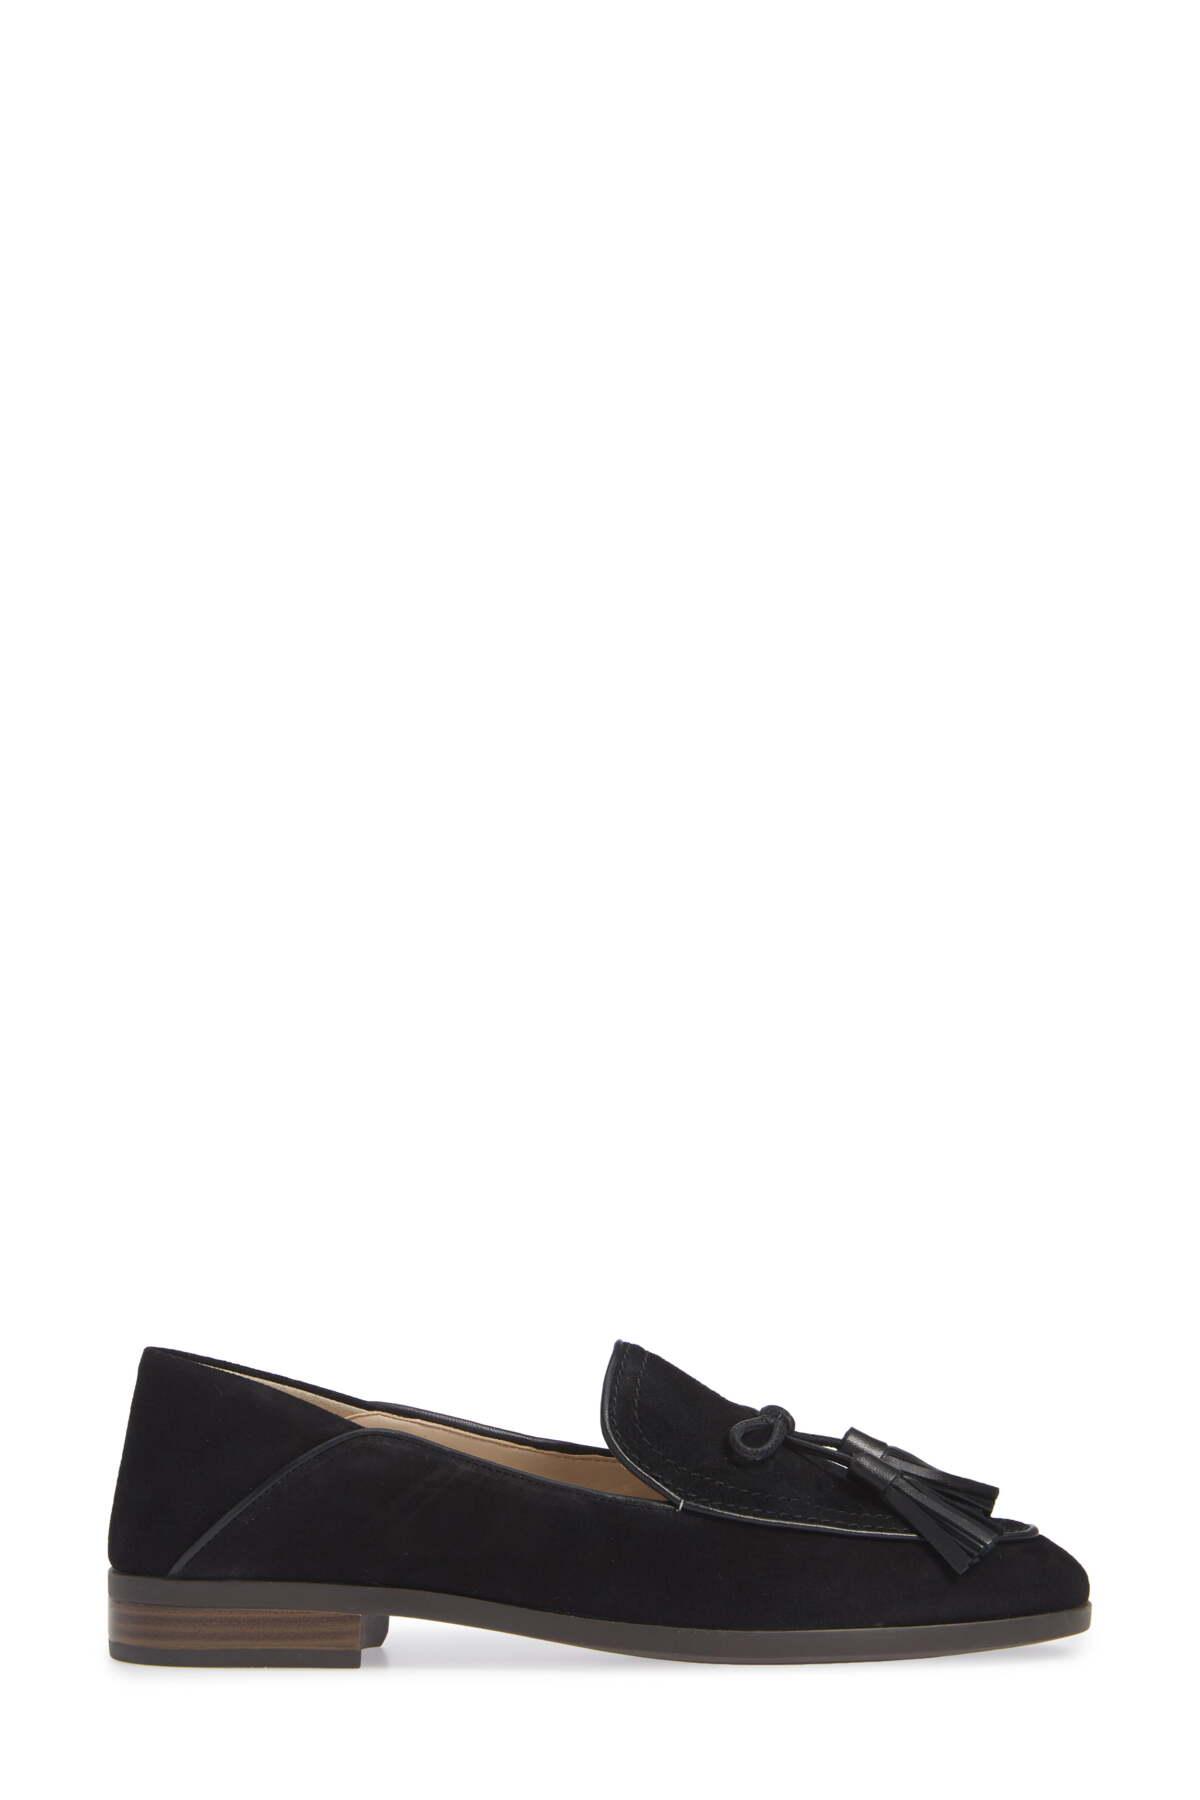 cole haan gabrielle loafer